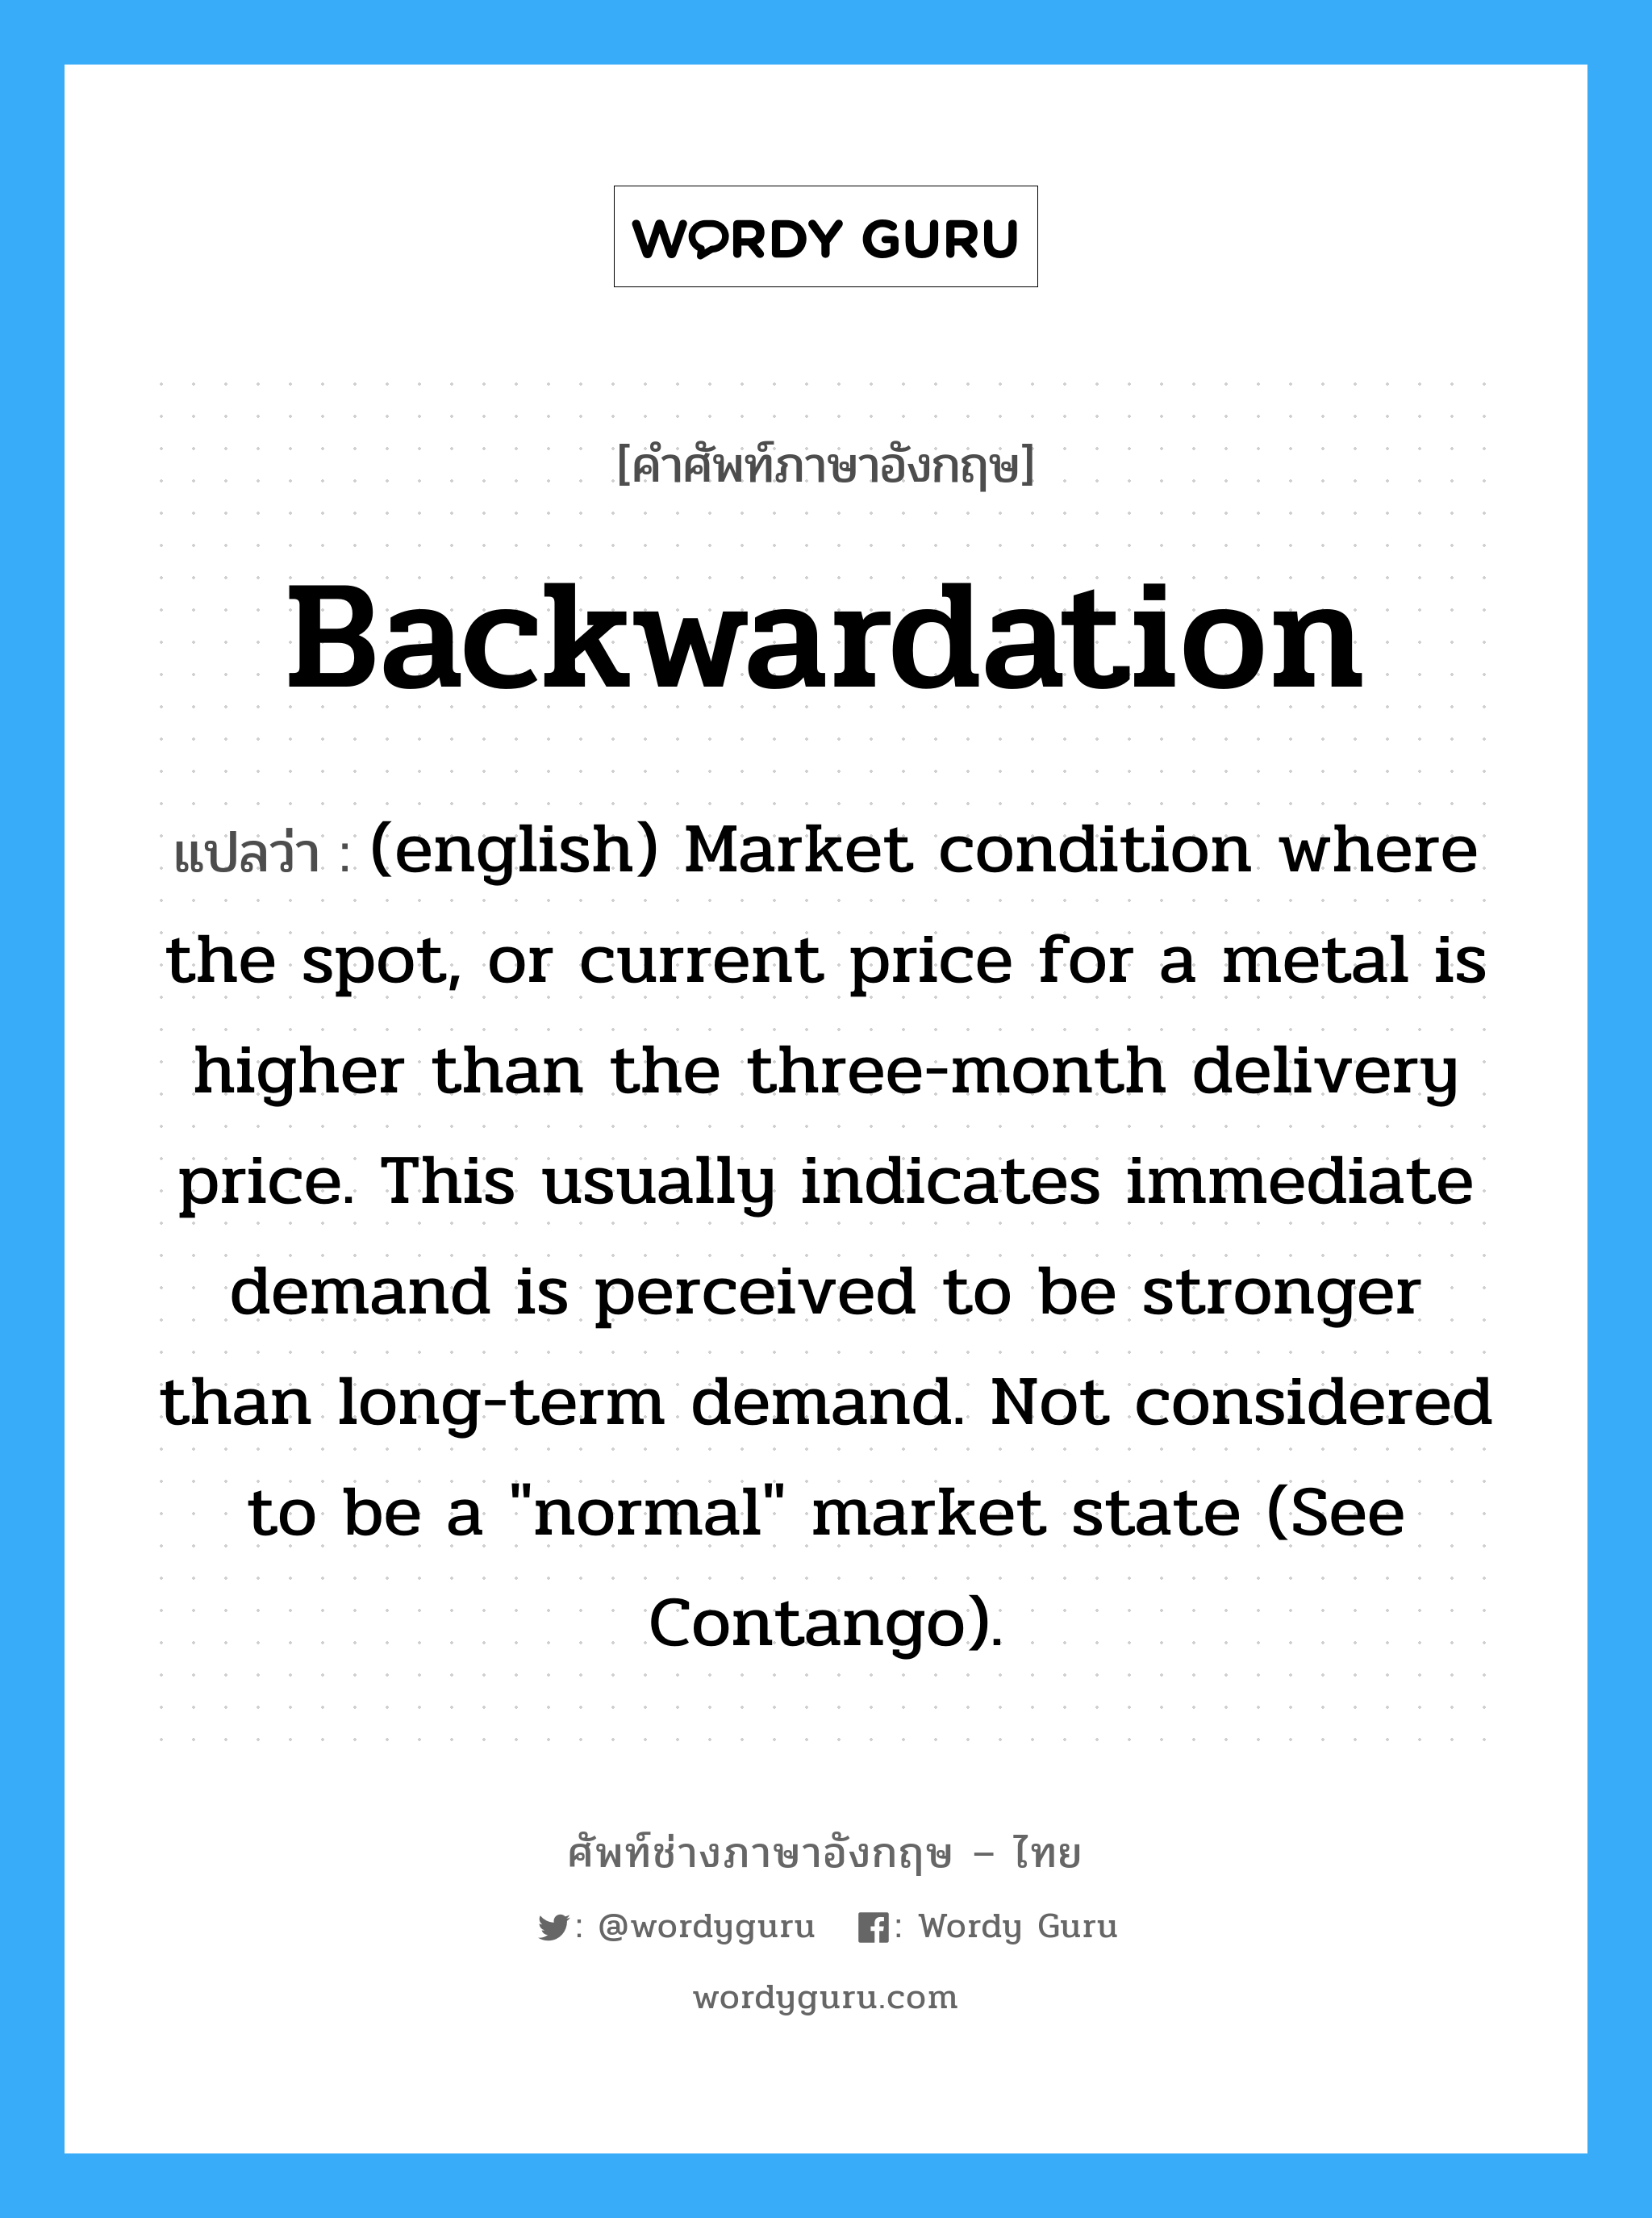 (english) Market condition where the spot, or current price for a metal is higher than the three-month delivery price. This usually indicates immediate demand is perceived to be stronger than long-term demand. Not considered to be a "normal" market state (See Contango). ภาษาอังกฤษ?, คำศัพท์ช่างภาษาอังกฤษ - ไทย (english) Market condition where the spot, or current price for a metal is higher than the three-month delivery price. This usually indicates immediate demand is perceived to be stronger than long-term demand. Not considered to be a "normal" market state (See Contango). คำศัพท์ภาษาอังกฤษ (english) Market condition where the spot, or current price for a metal is higher than the three-month delivery price. This usually indicates immediate demand is perceived to be stronger than long-term demand. Not considered to be a "normal" market state (See Contango). แปลว่า Backwardation